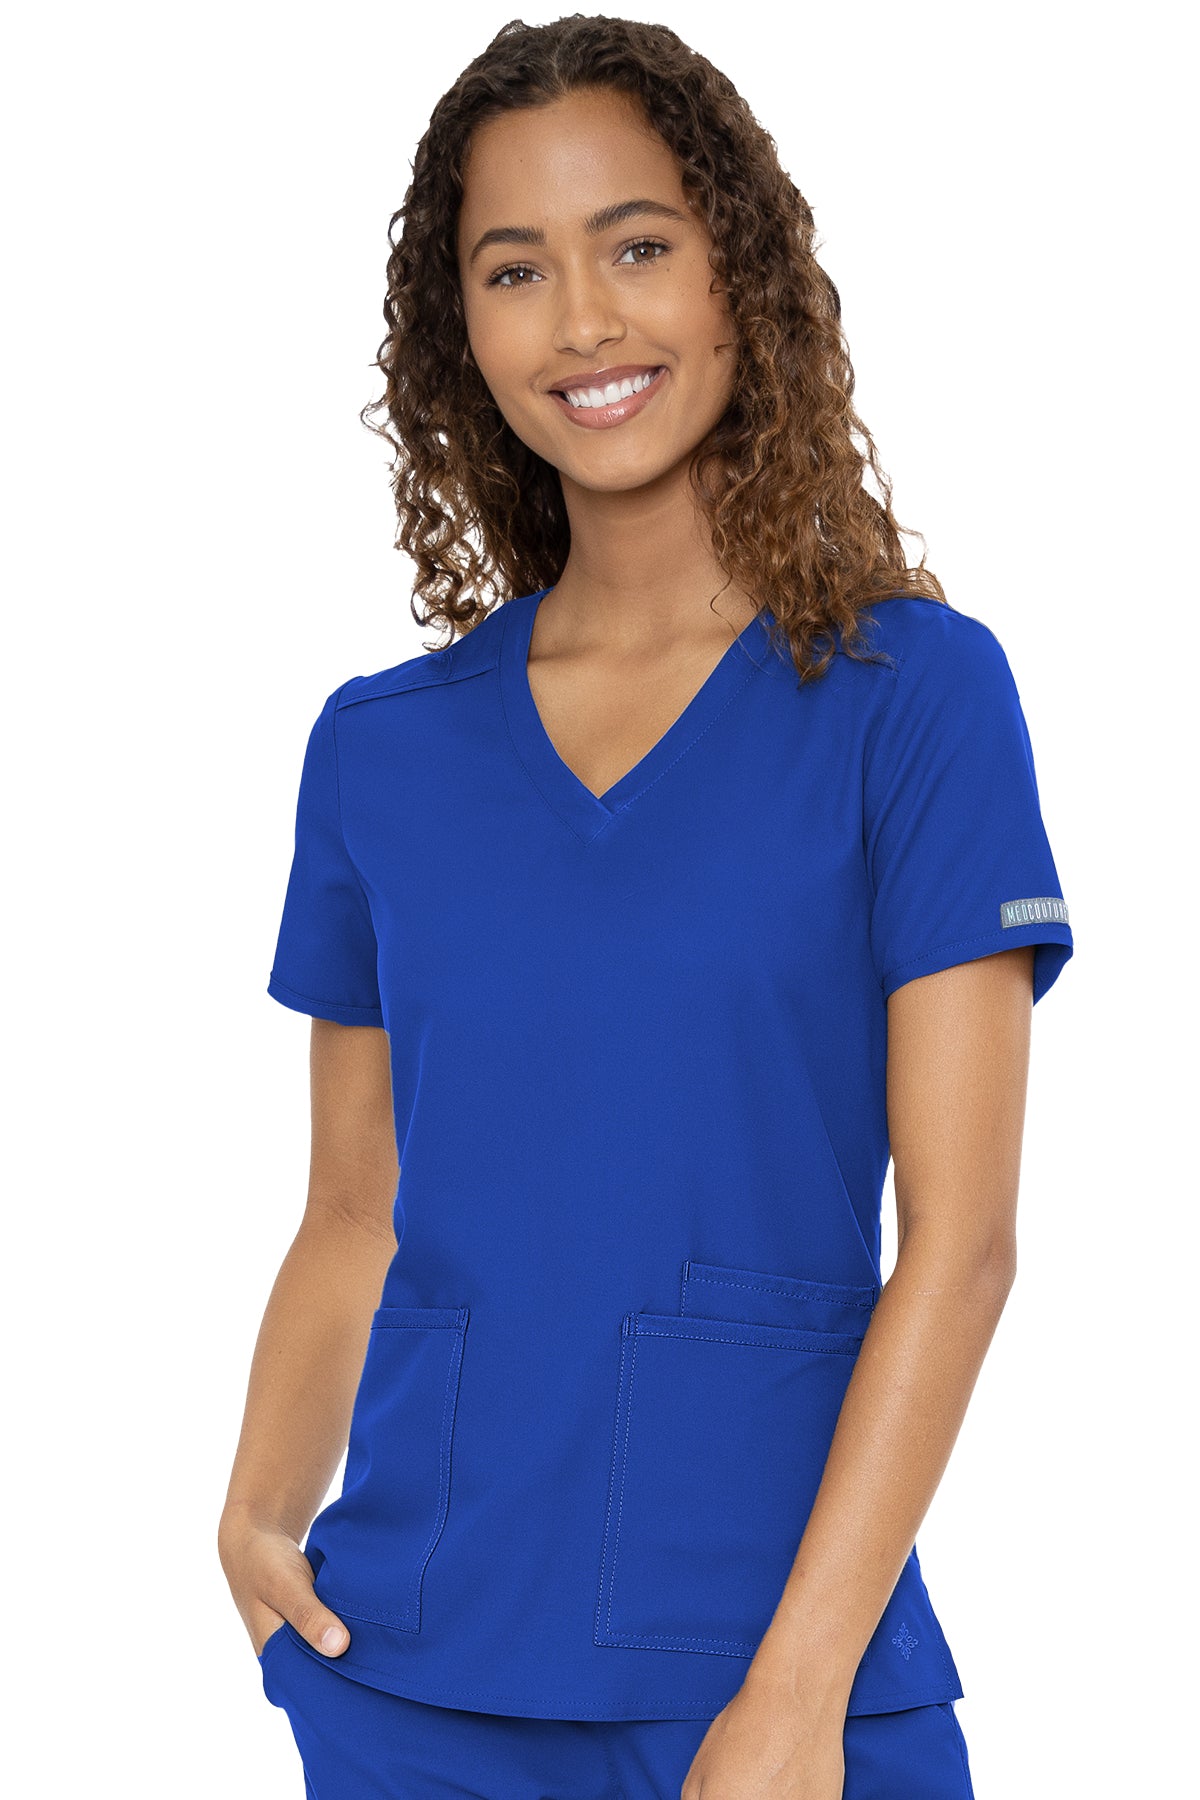 Med Couture Scrub Top Insight Classic V-Neck 3 Pocket in Royal at Parker's Clothing and Shoes.